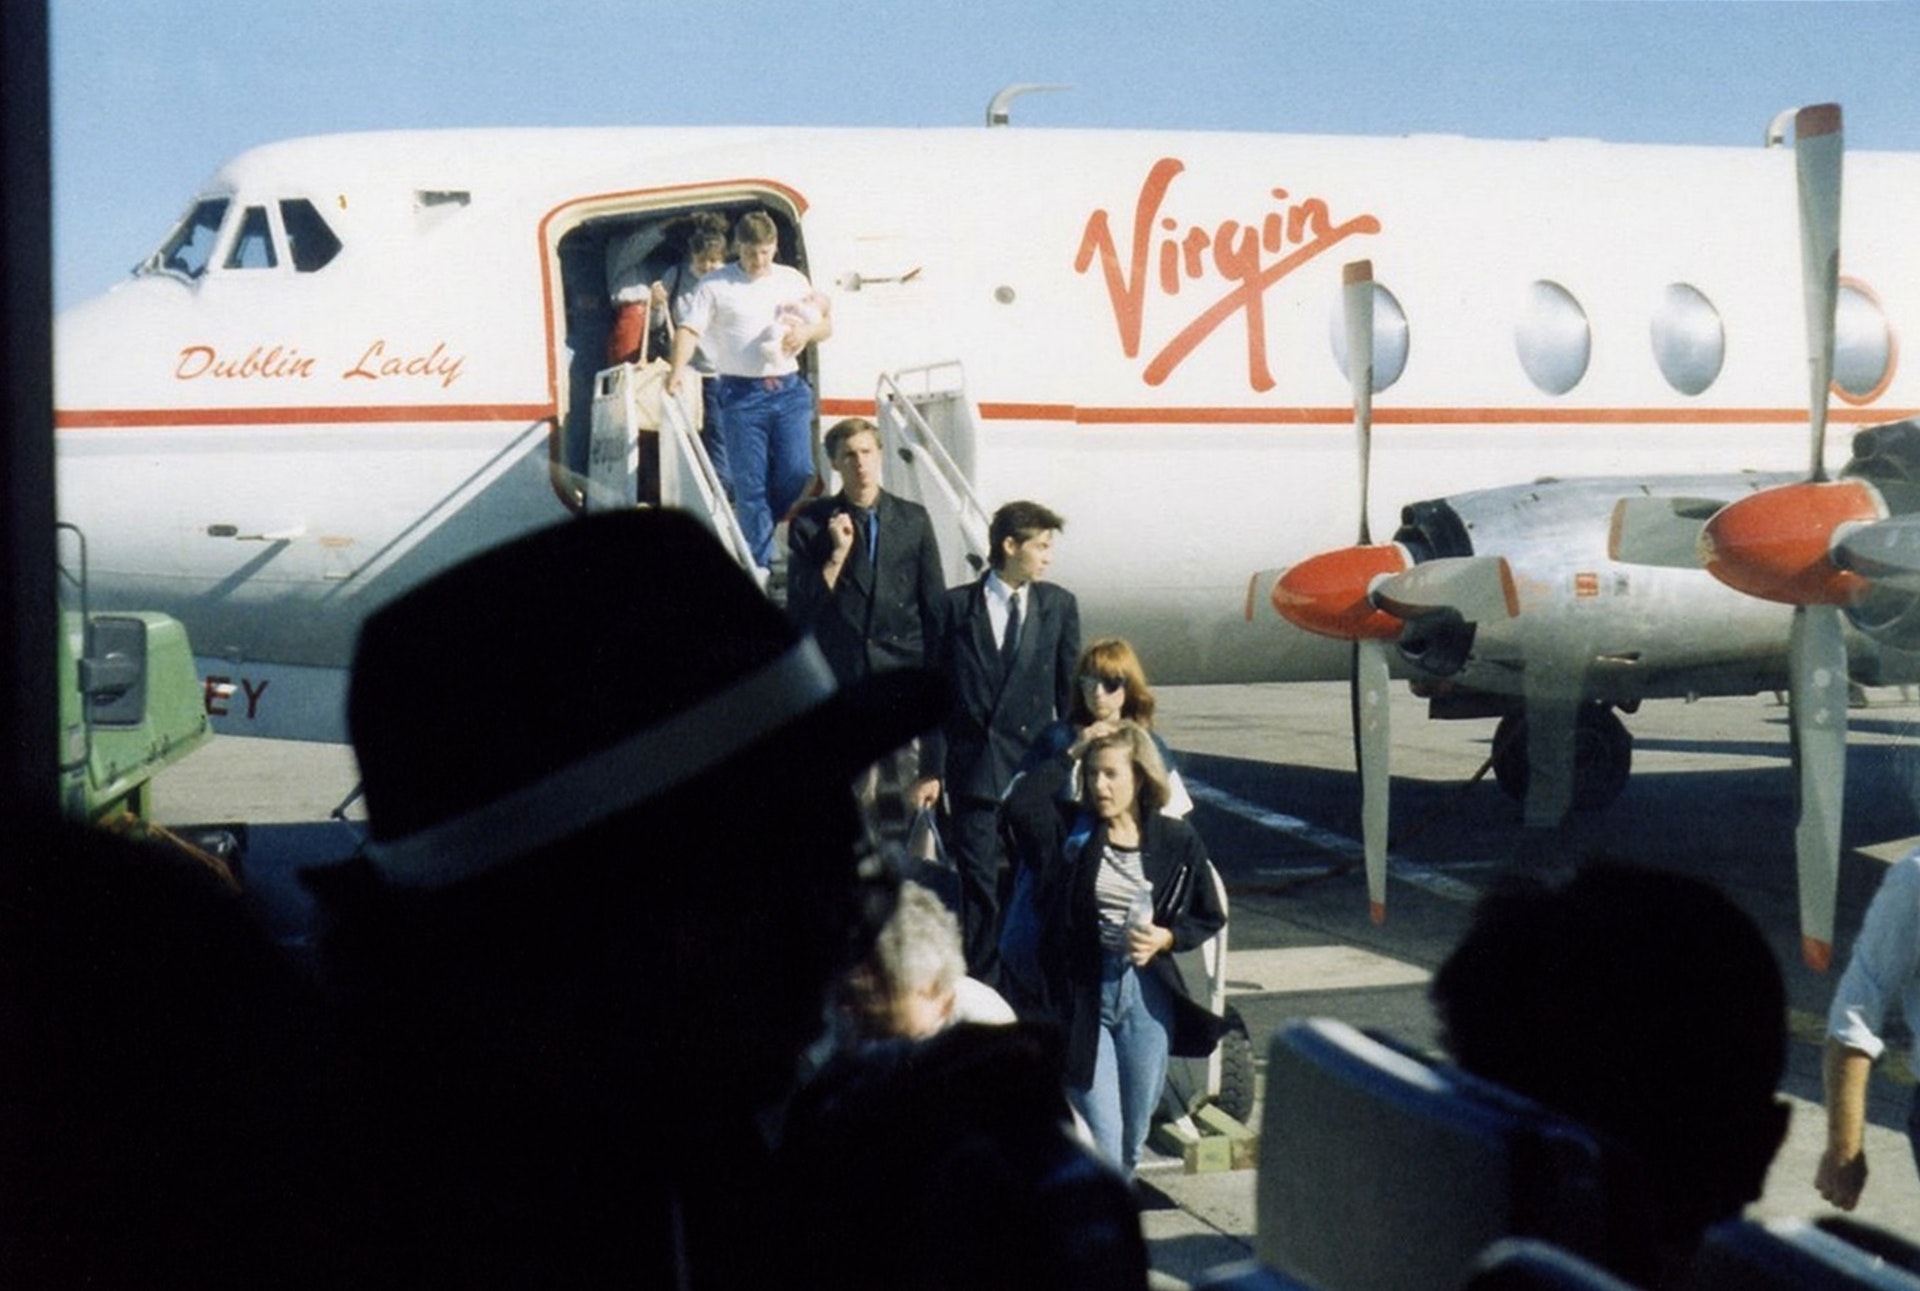 Travelers stepping off the 'Dublin Lady' Virgin plane, exemplifying the allure of emotional marketing in aviation and the joy of journeying with a brand that connects deeply with its passengers.